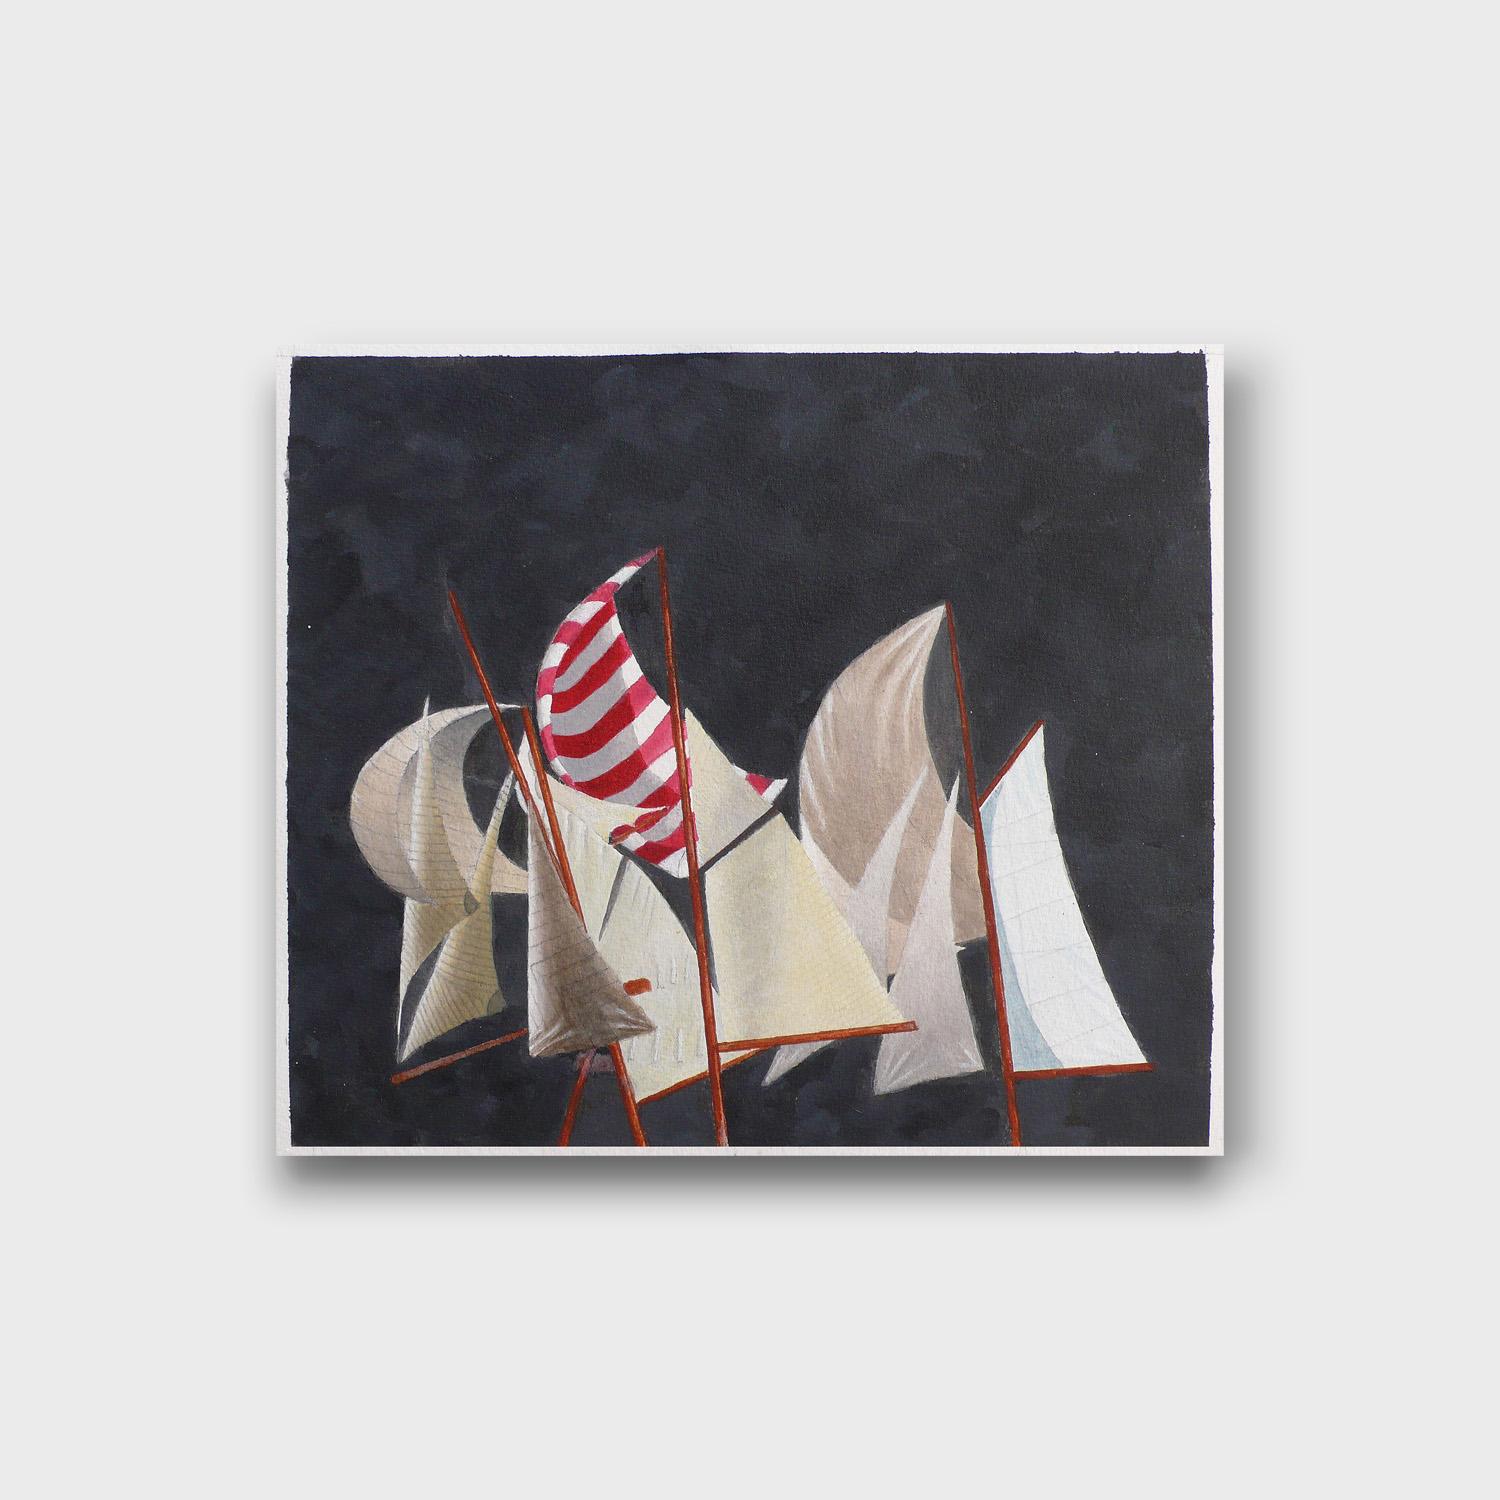 Paul Hobson Figurative Painting - A Conceptualized Acrylic on Paper Painting, "Sail 1"